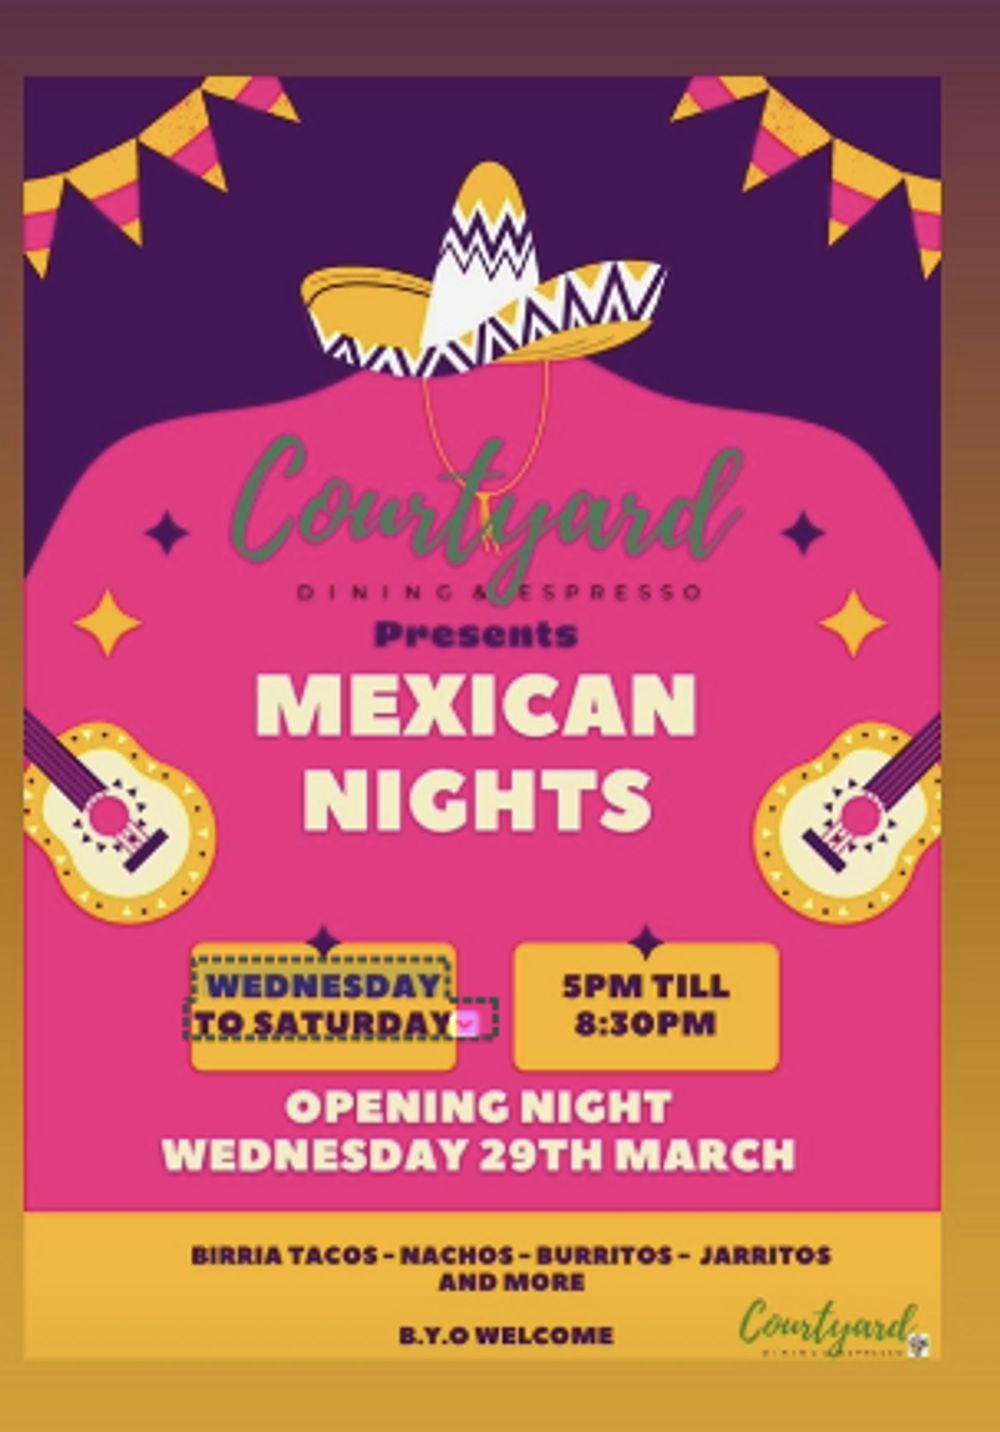 Mexican Night at Courtyard Telopea - Stitch Event - Companionship over 50